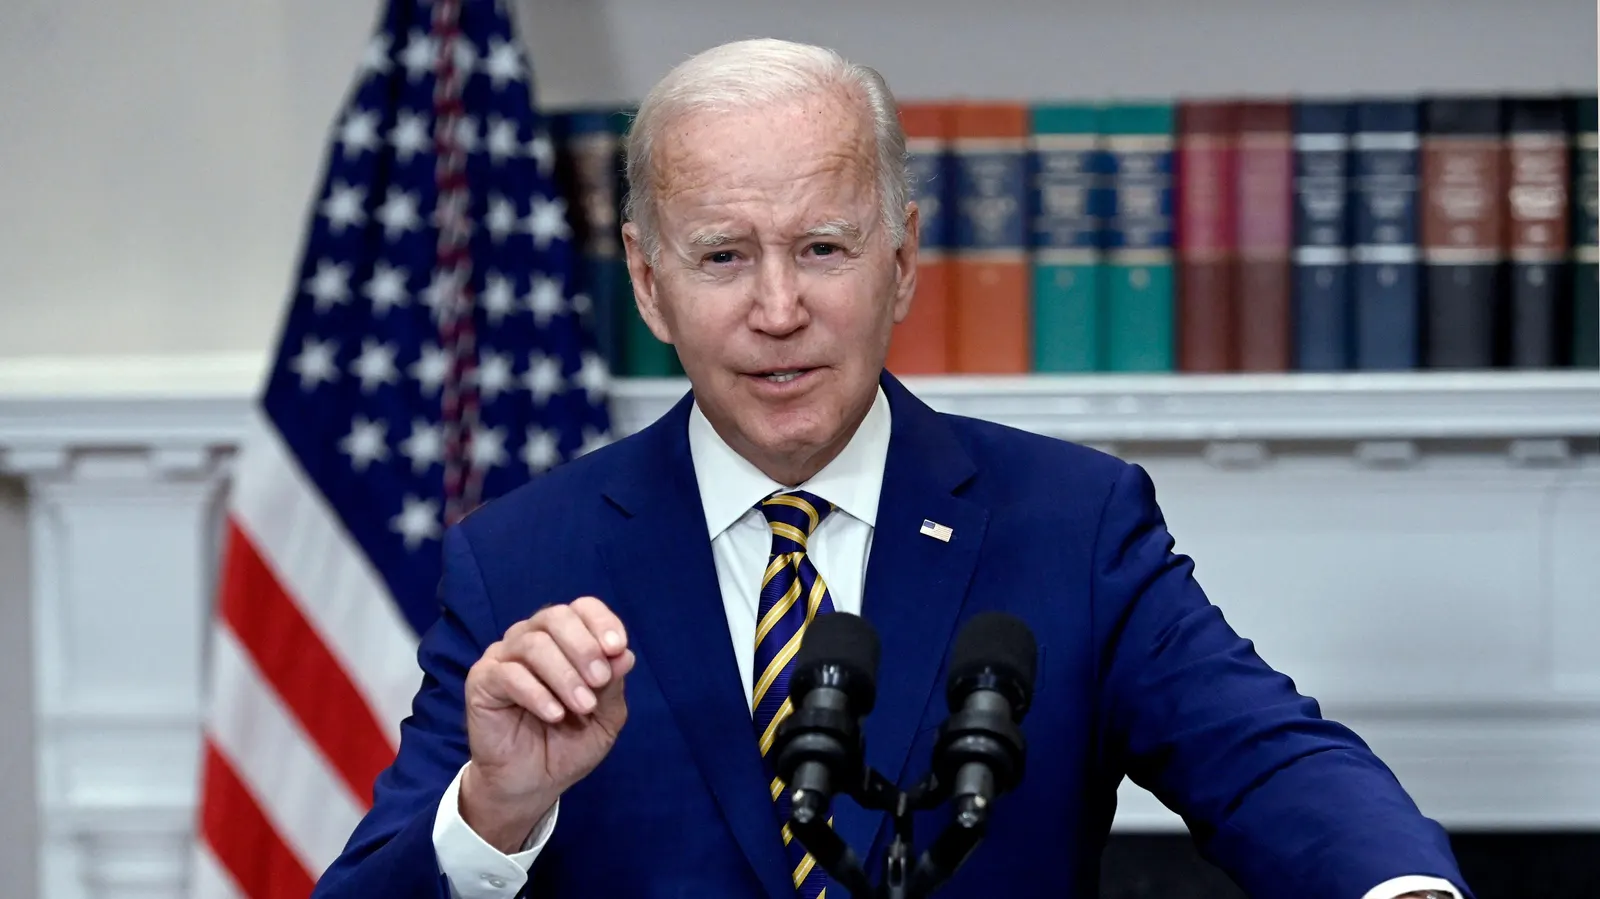 Biden's latest move targets public service workers (Credits: Forbes)